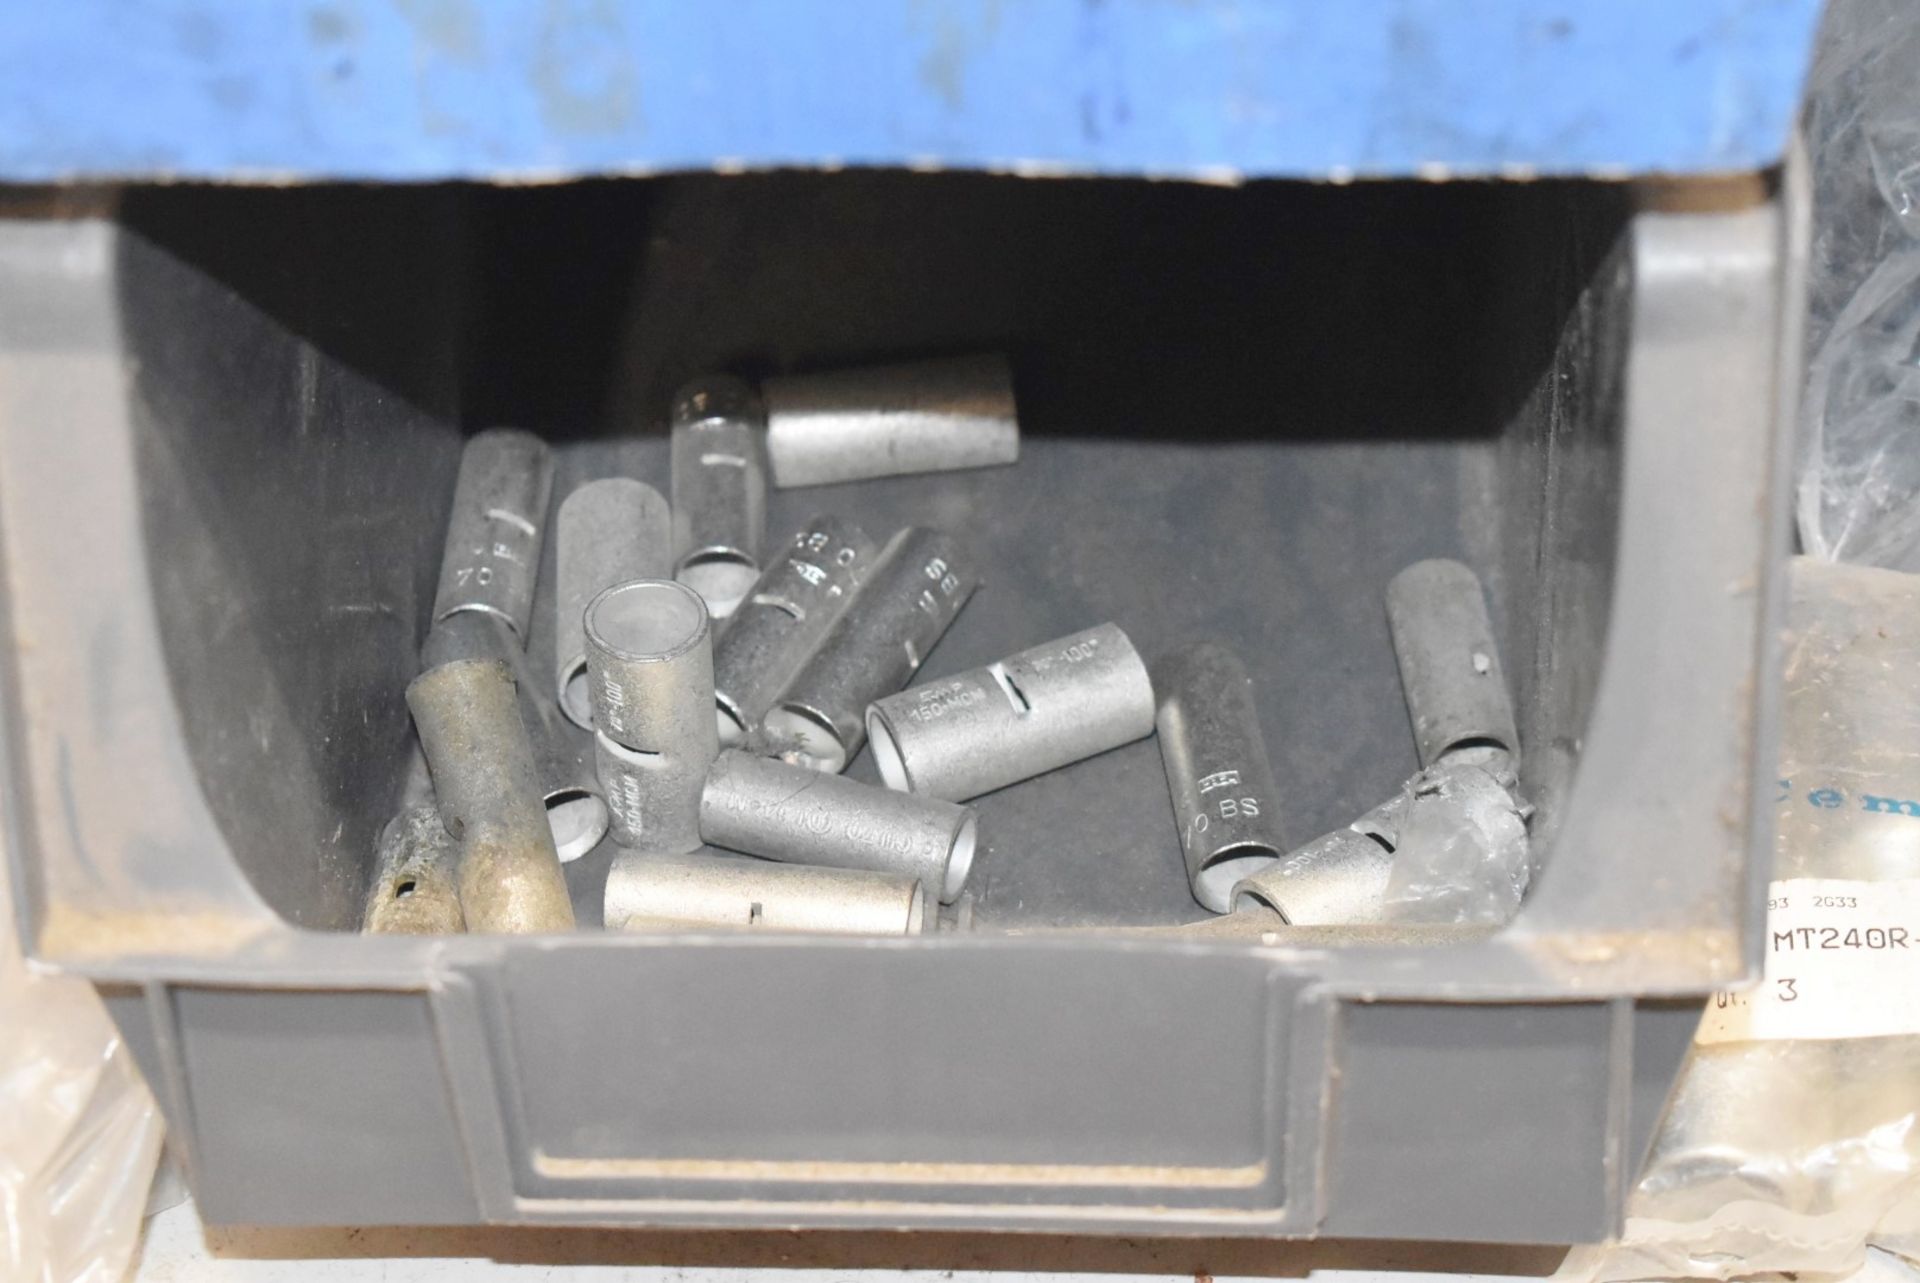 35 x Lindbins With Contents - Lugs, Glands, Pots & Seals, Through Connectors, Industrial Switches - Image 24 of 46